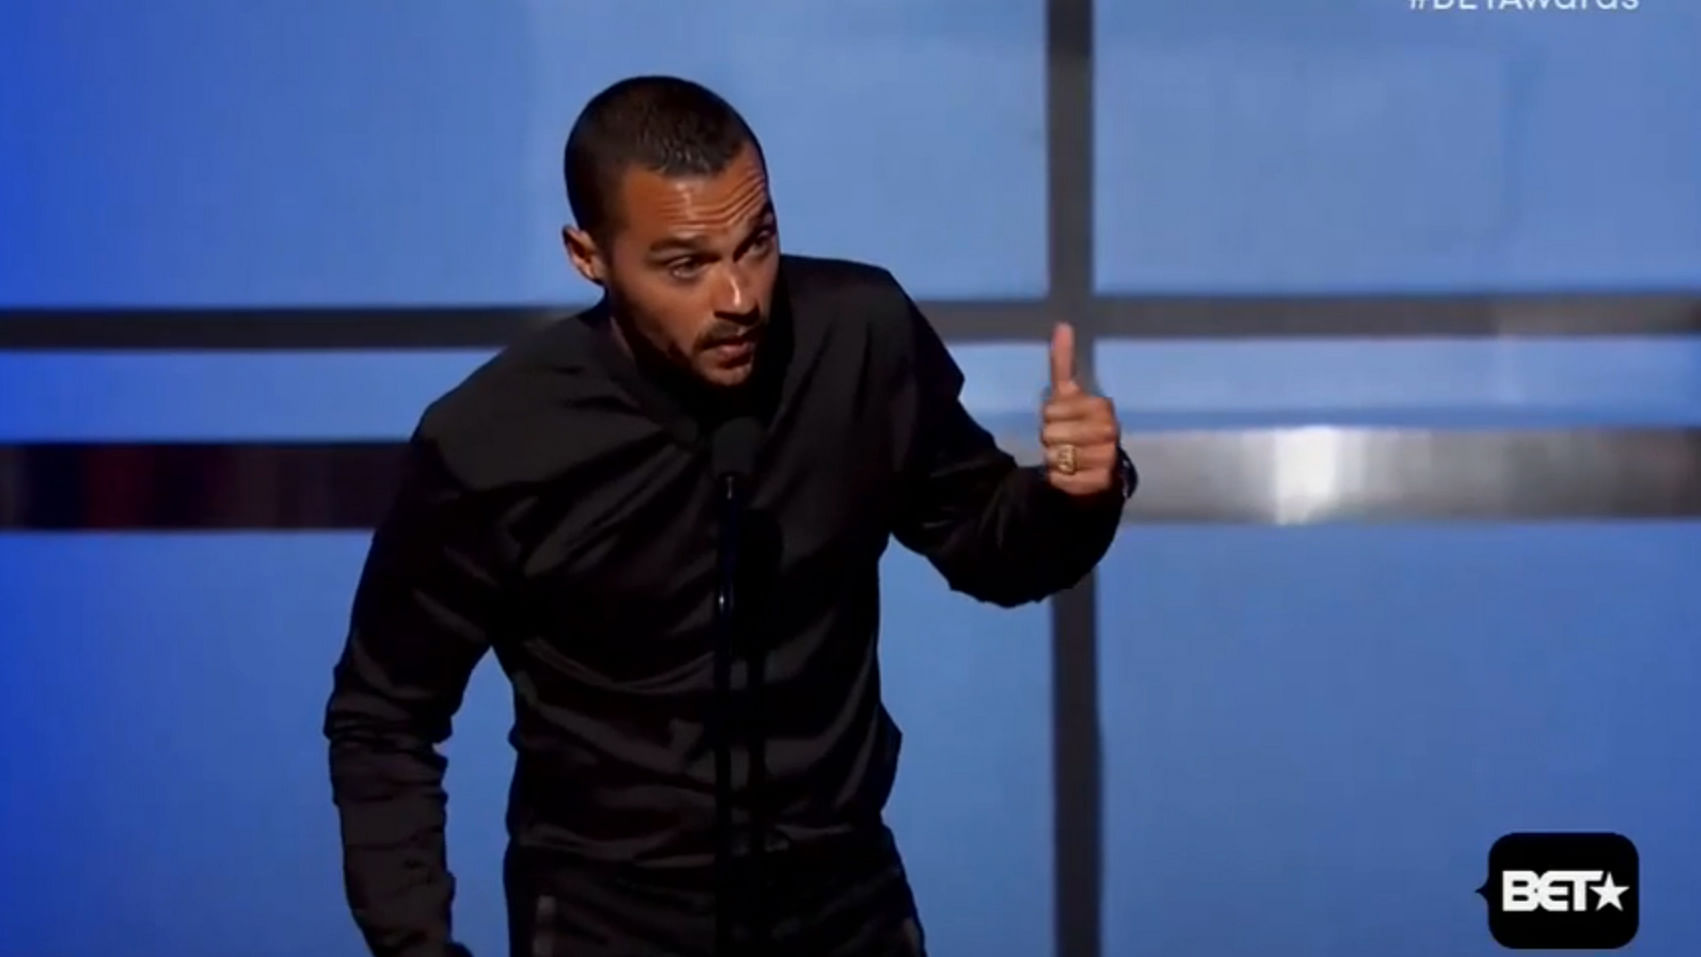 Jesse Williams at the BET Awards delivering his speech. (Photo: Screenshot)